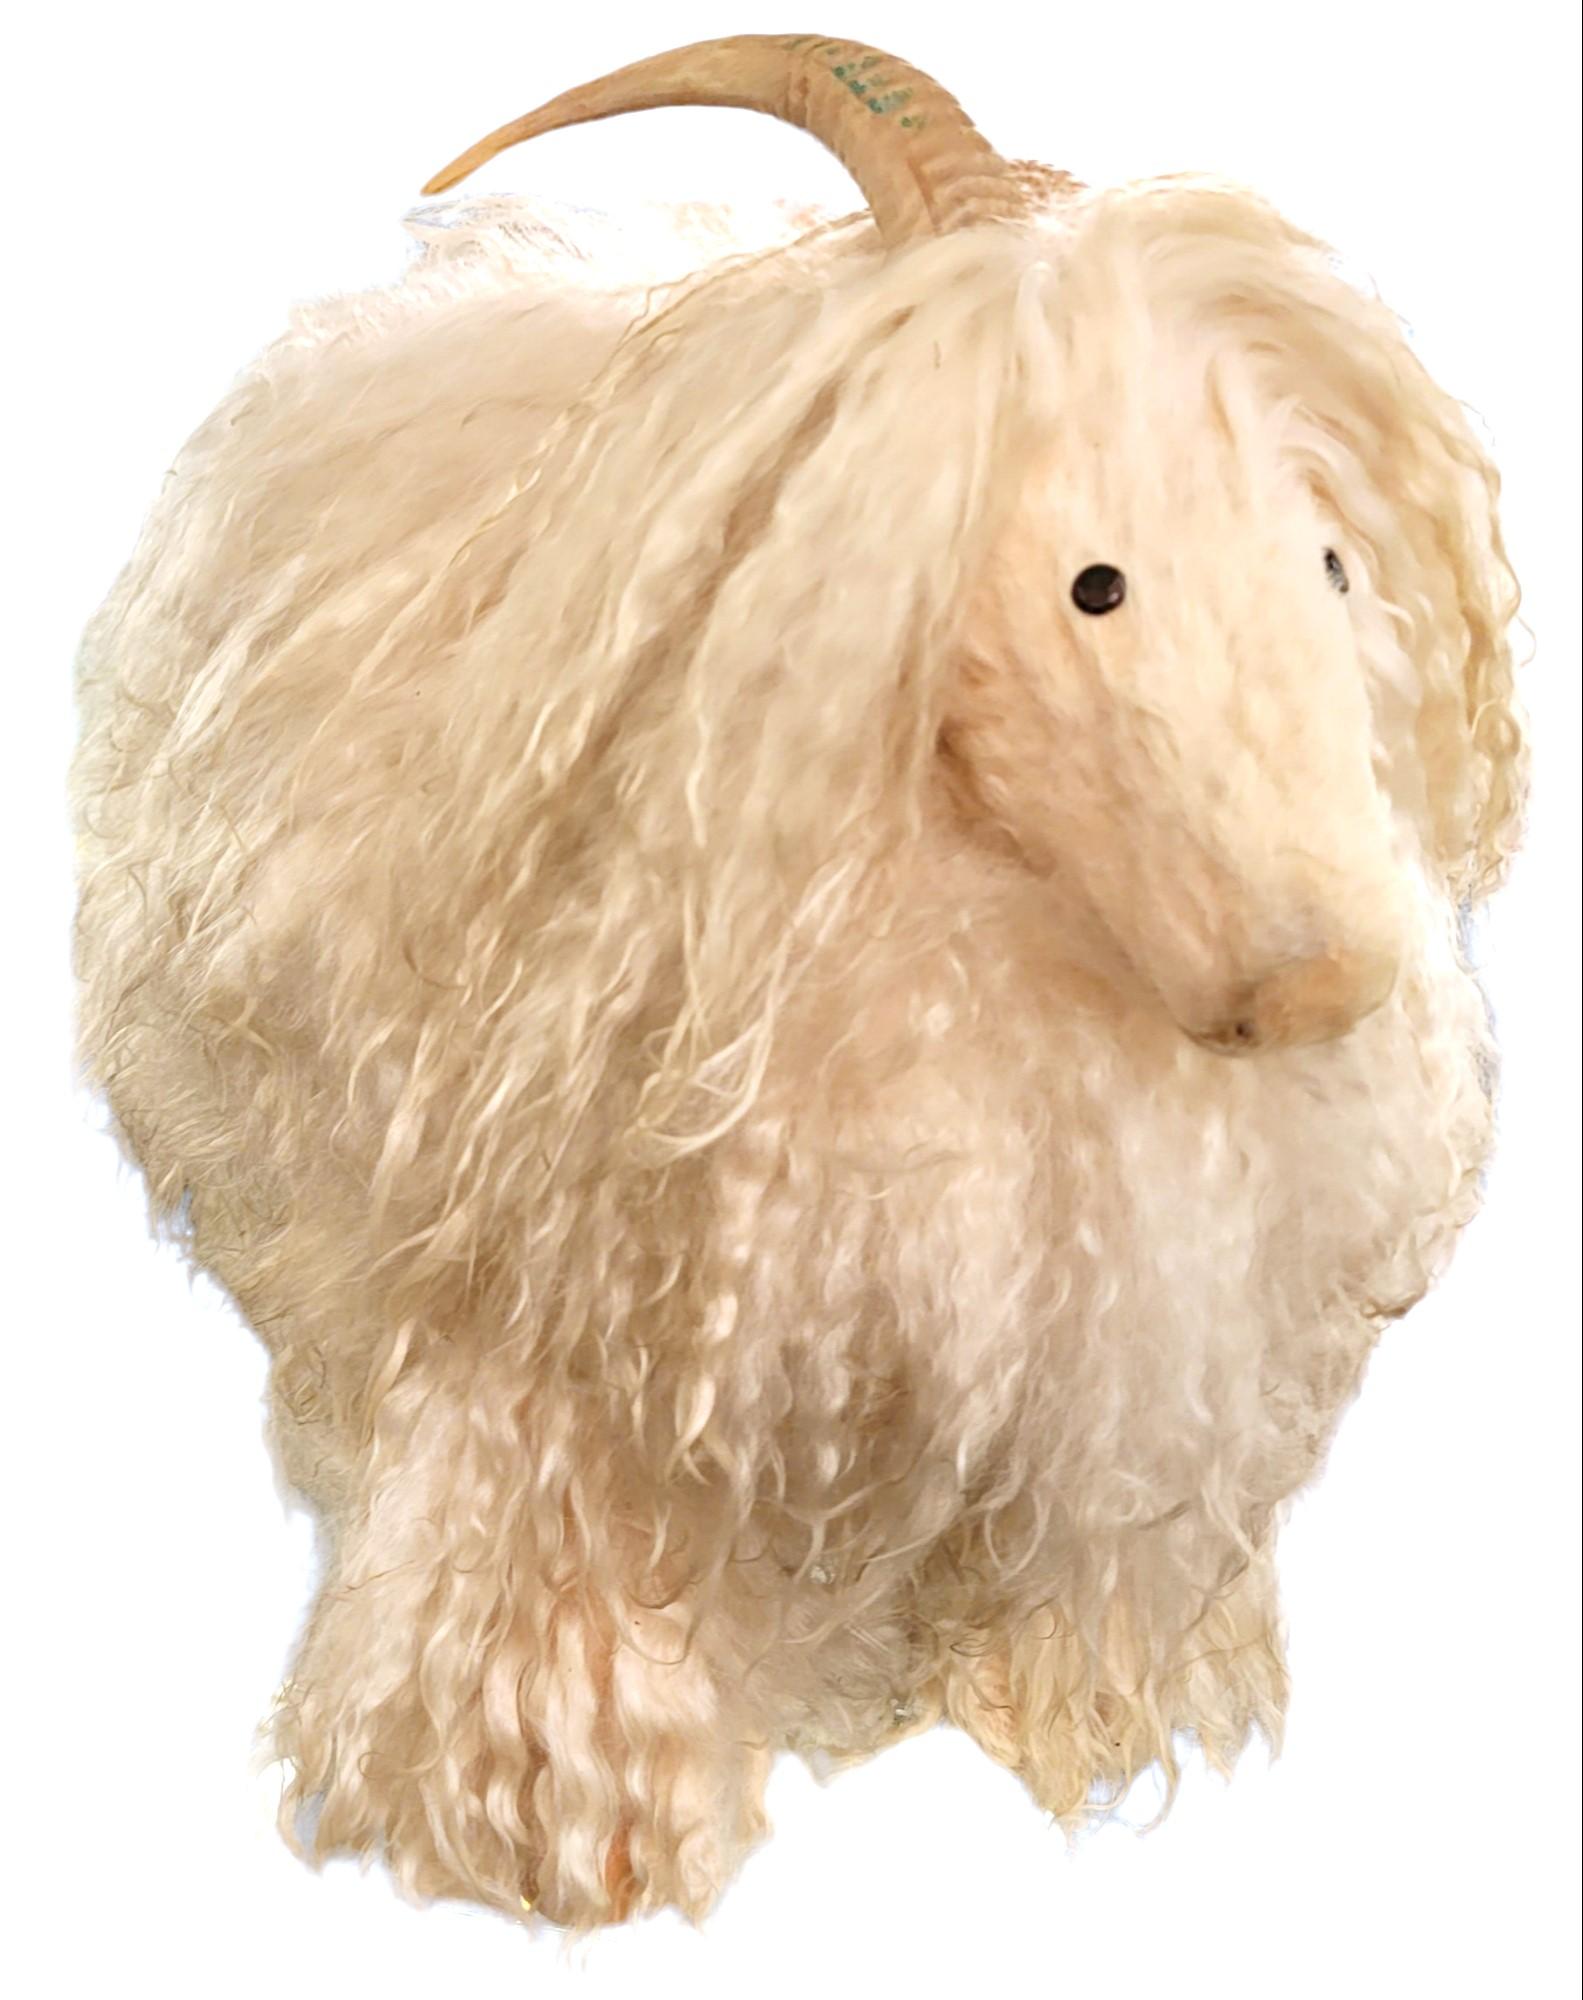 Arts and Crafts 1960s Lalanne Style French Long Hair Sheep Sculpture